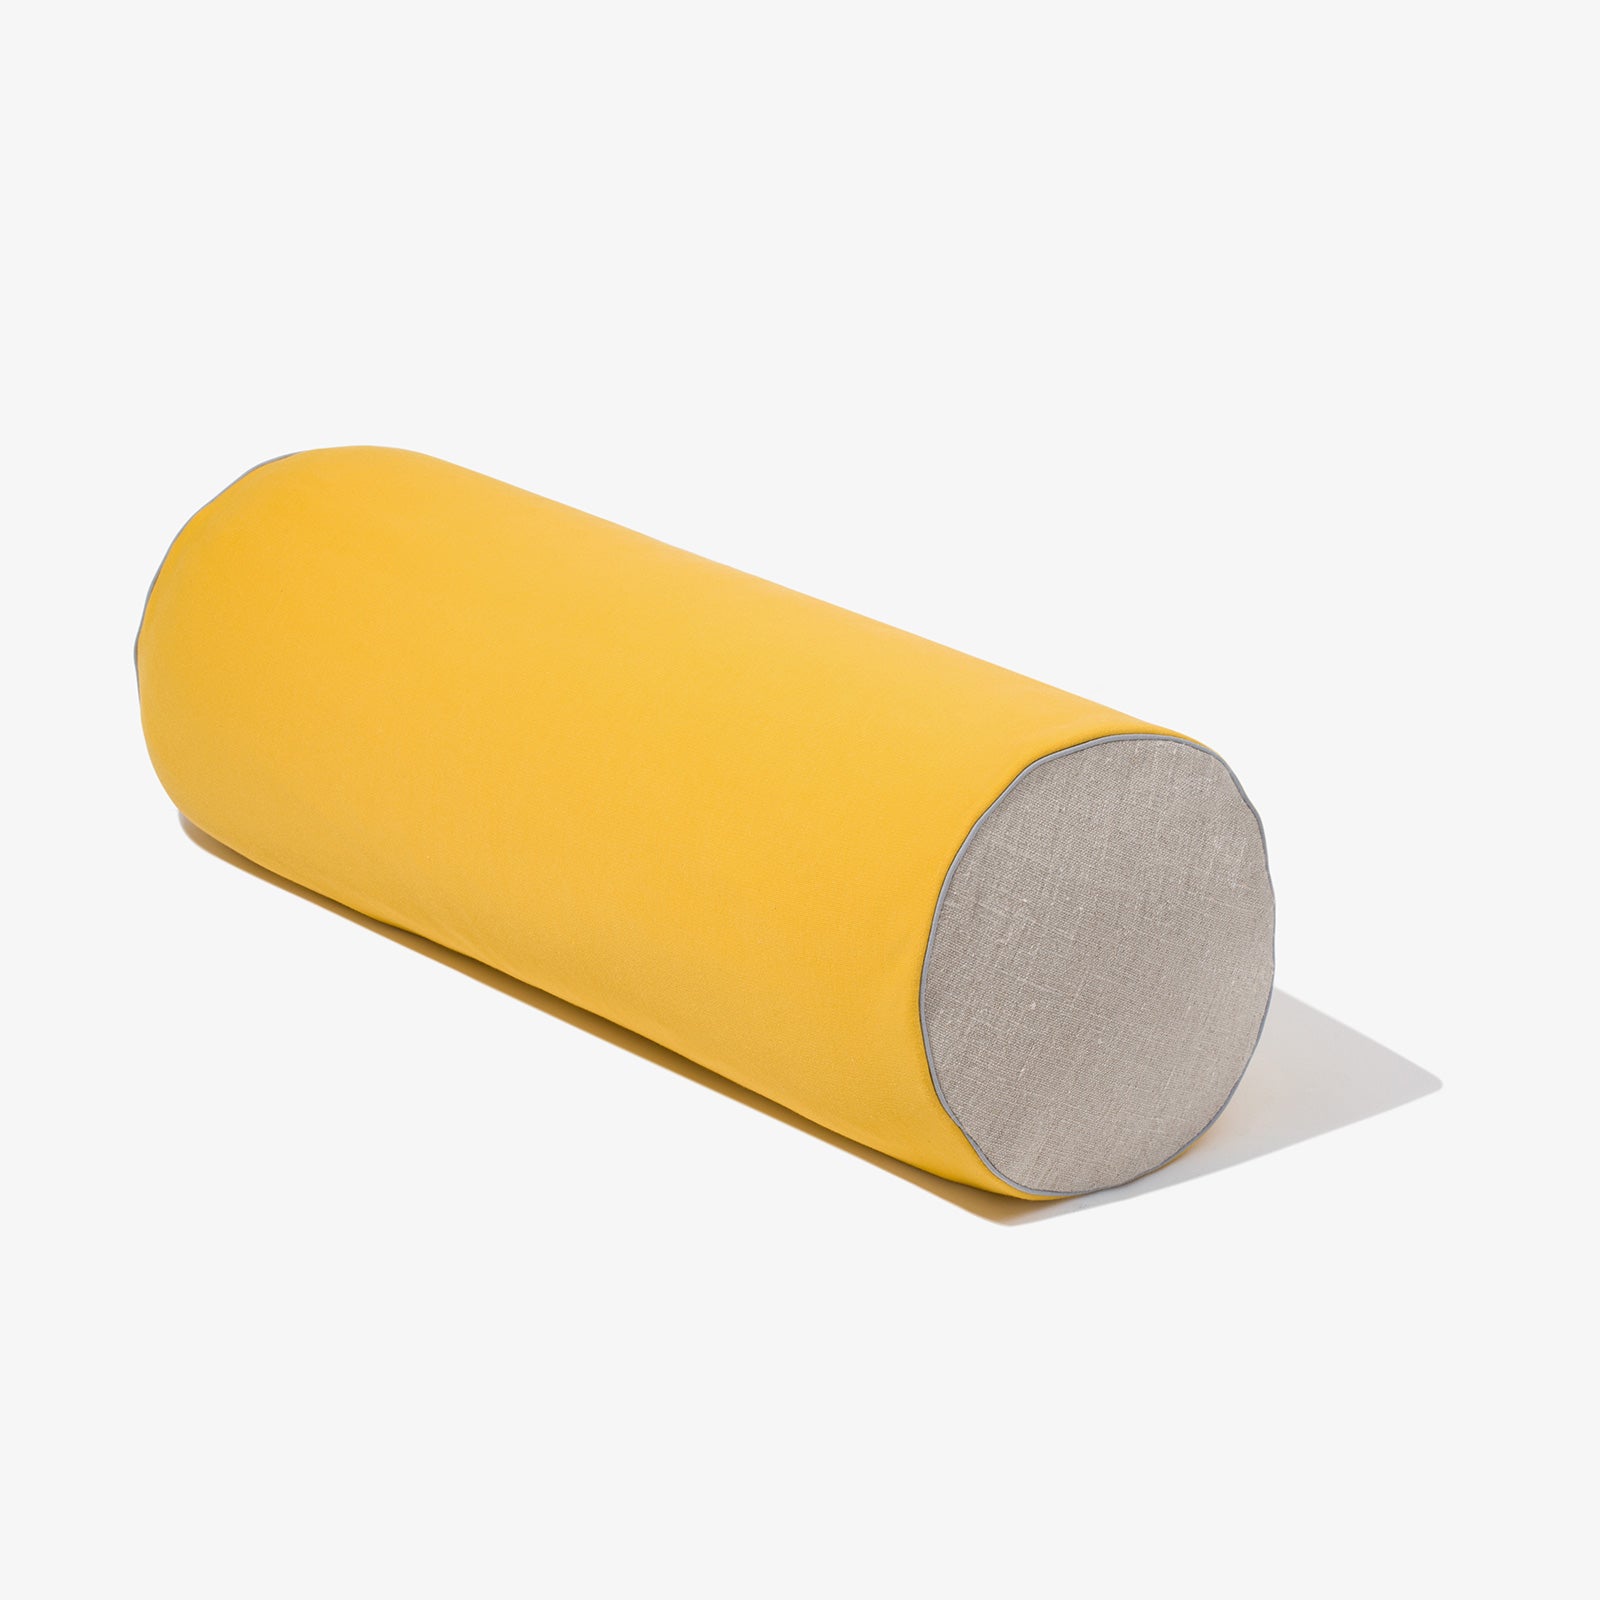 Pillowcase for a small roller (various colors)